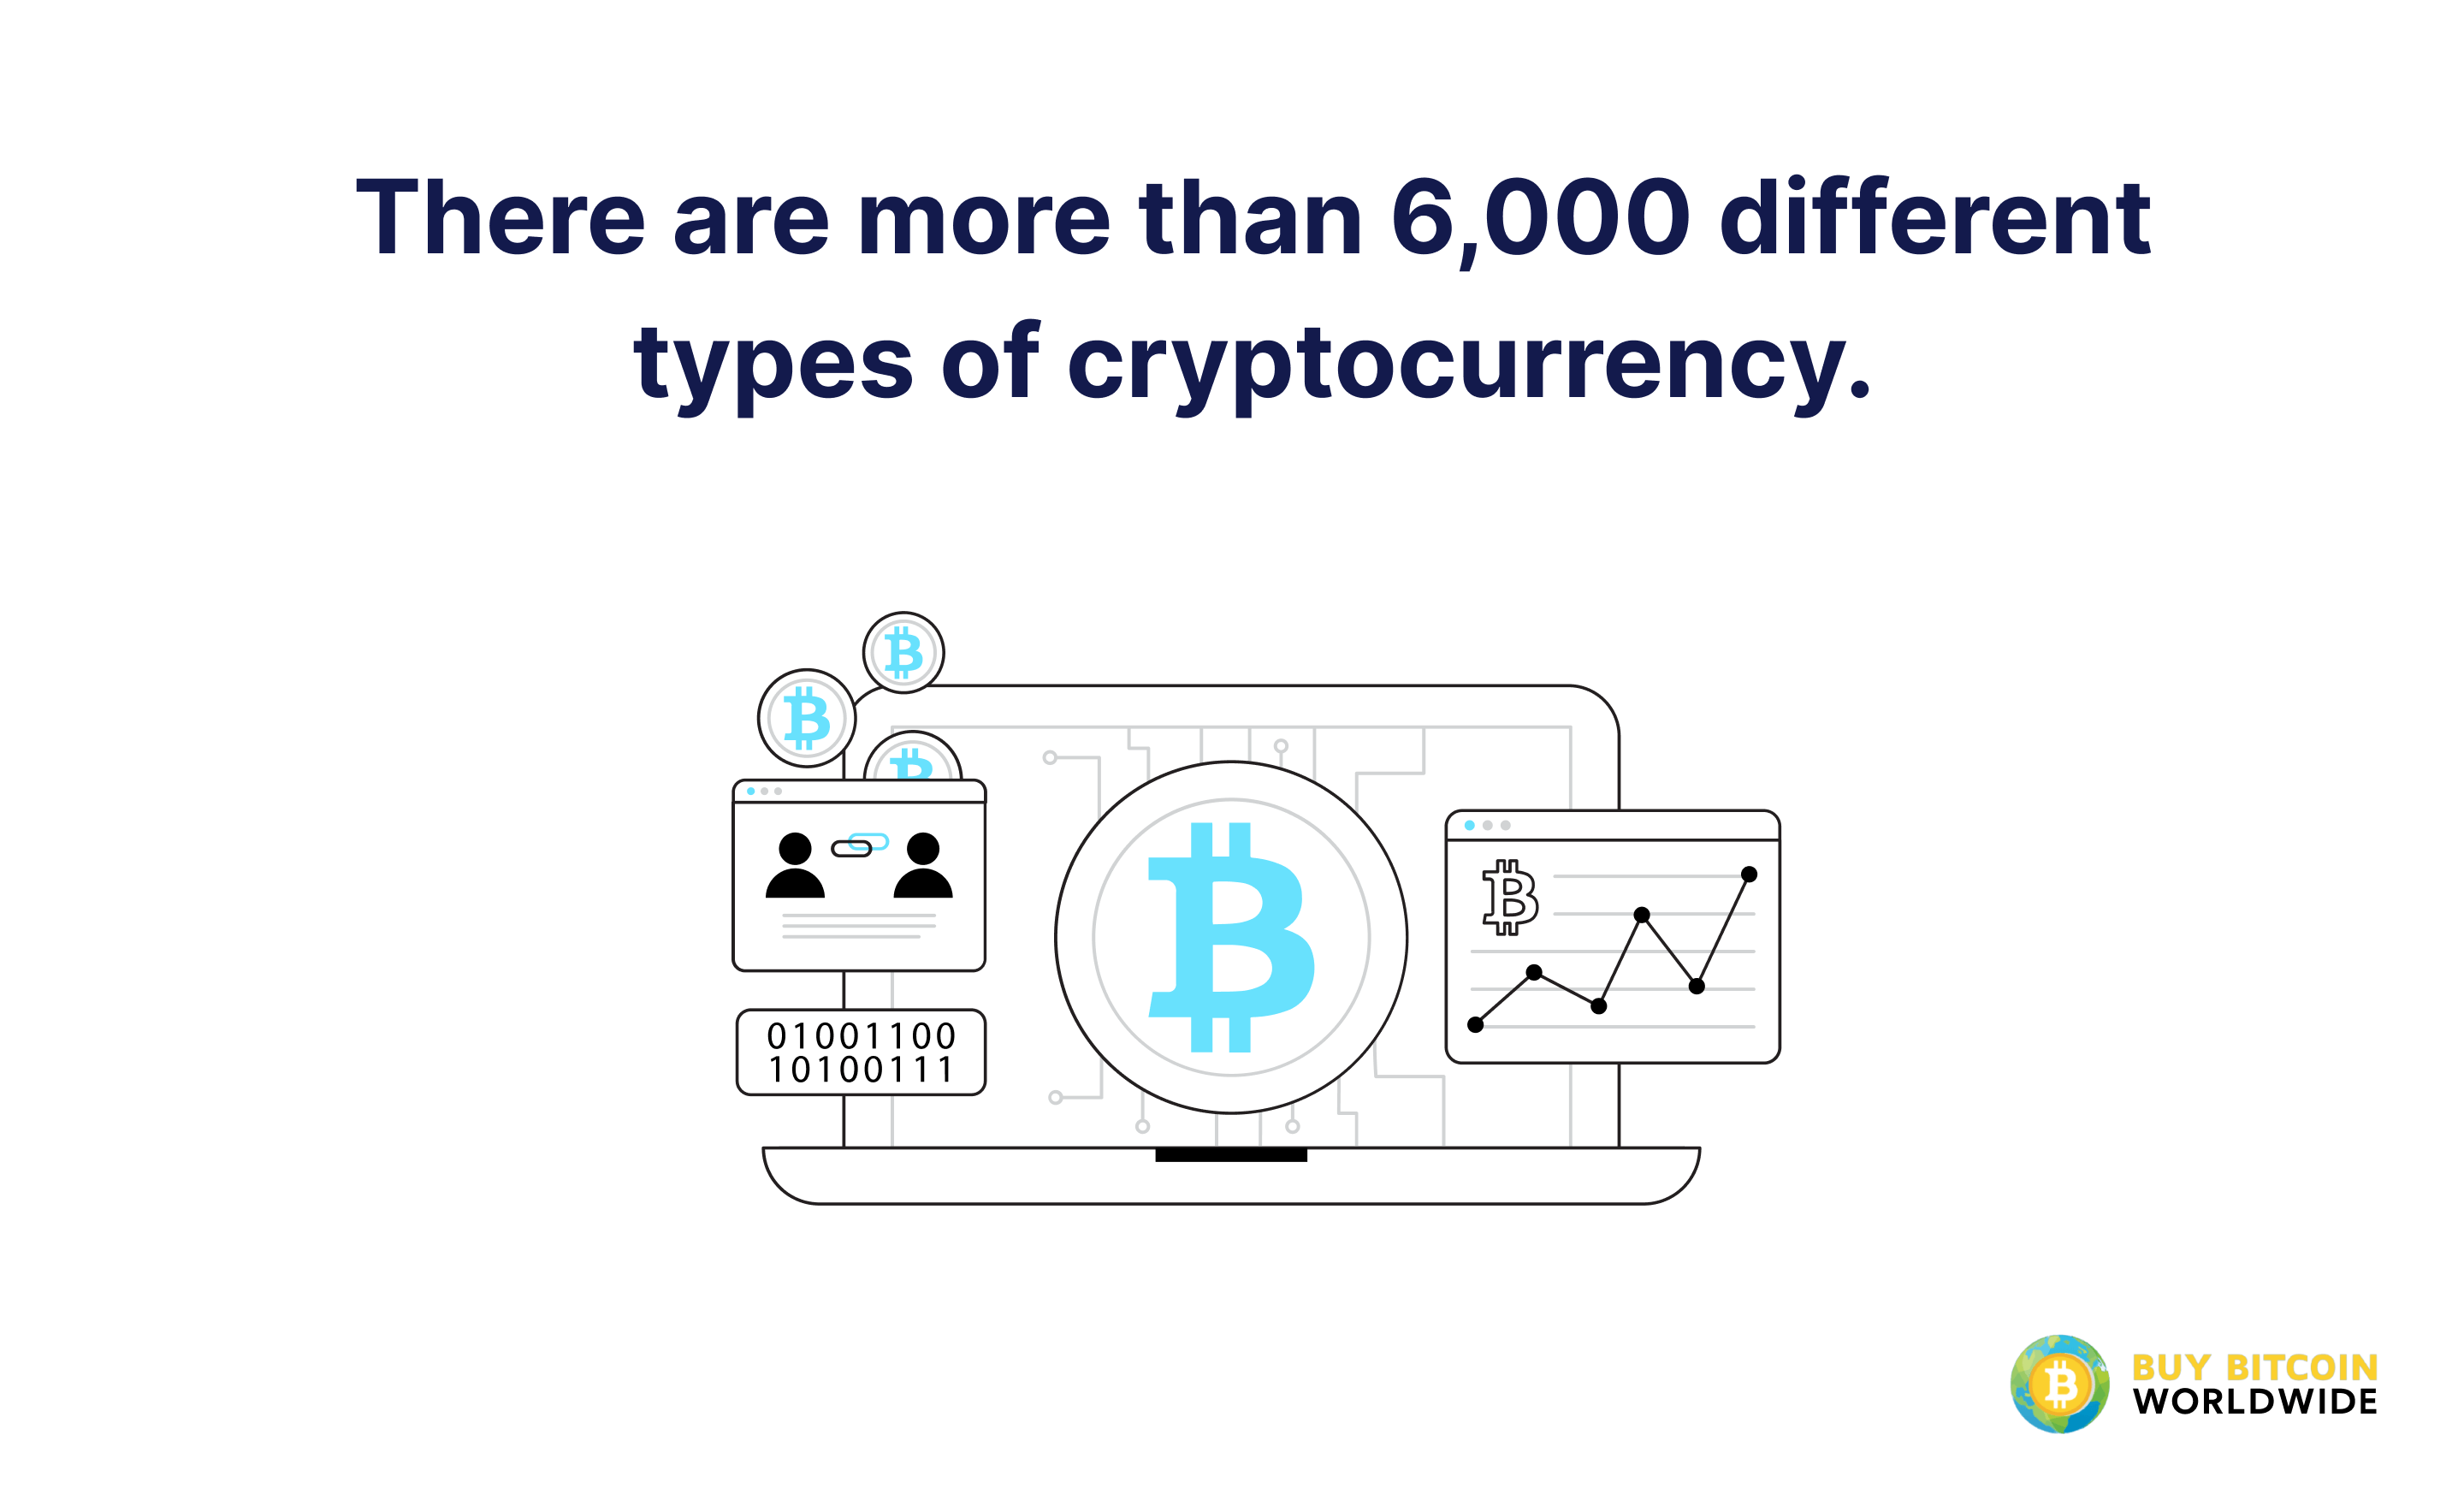 there are 6,000 types of cryptocurrency